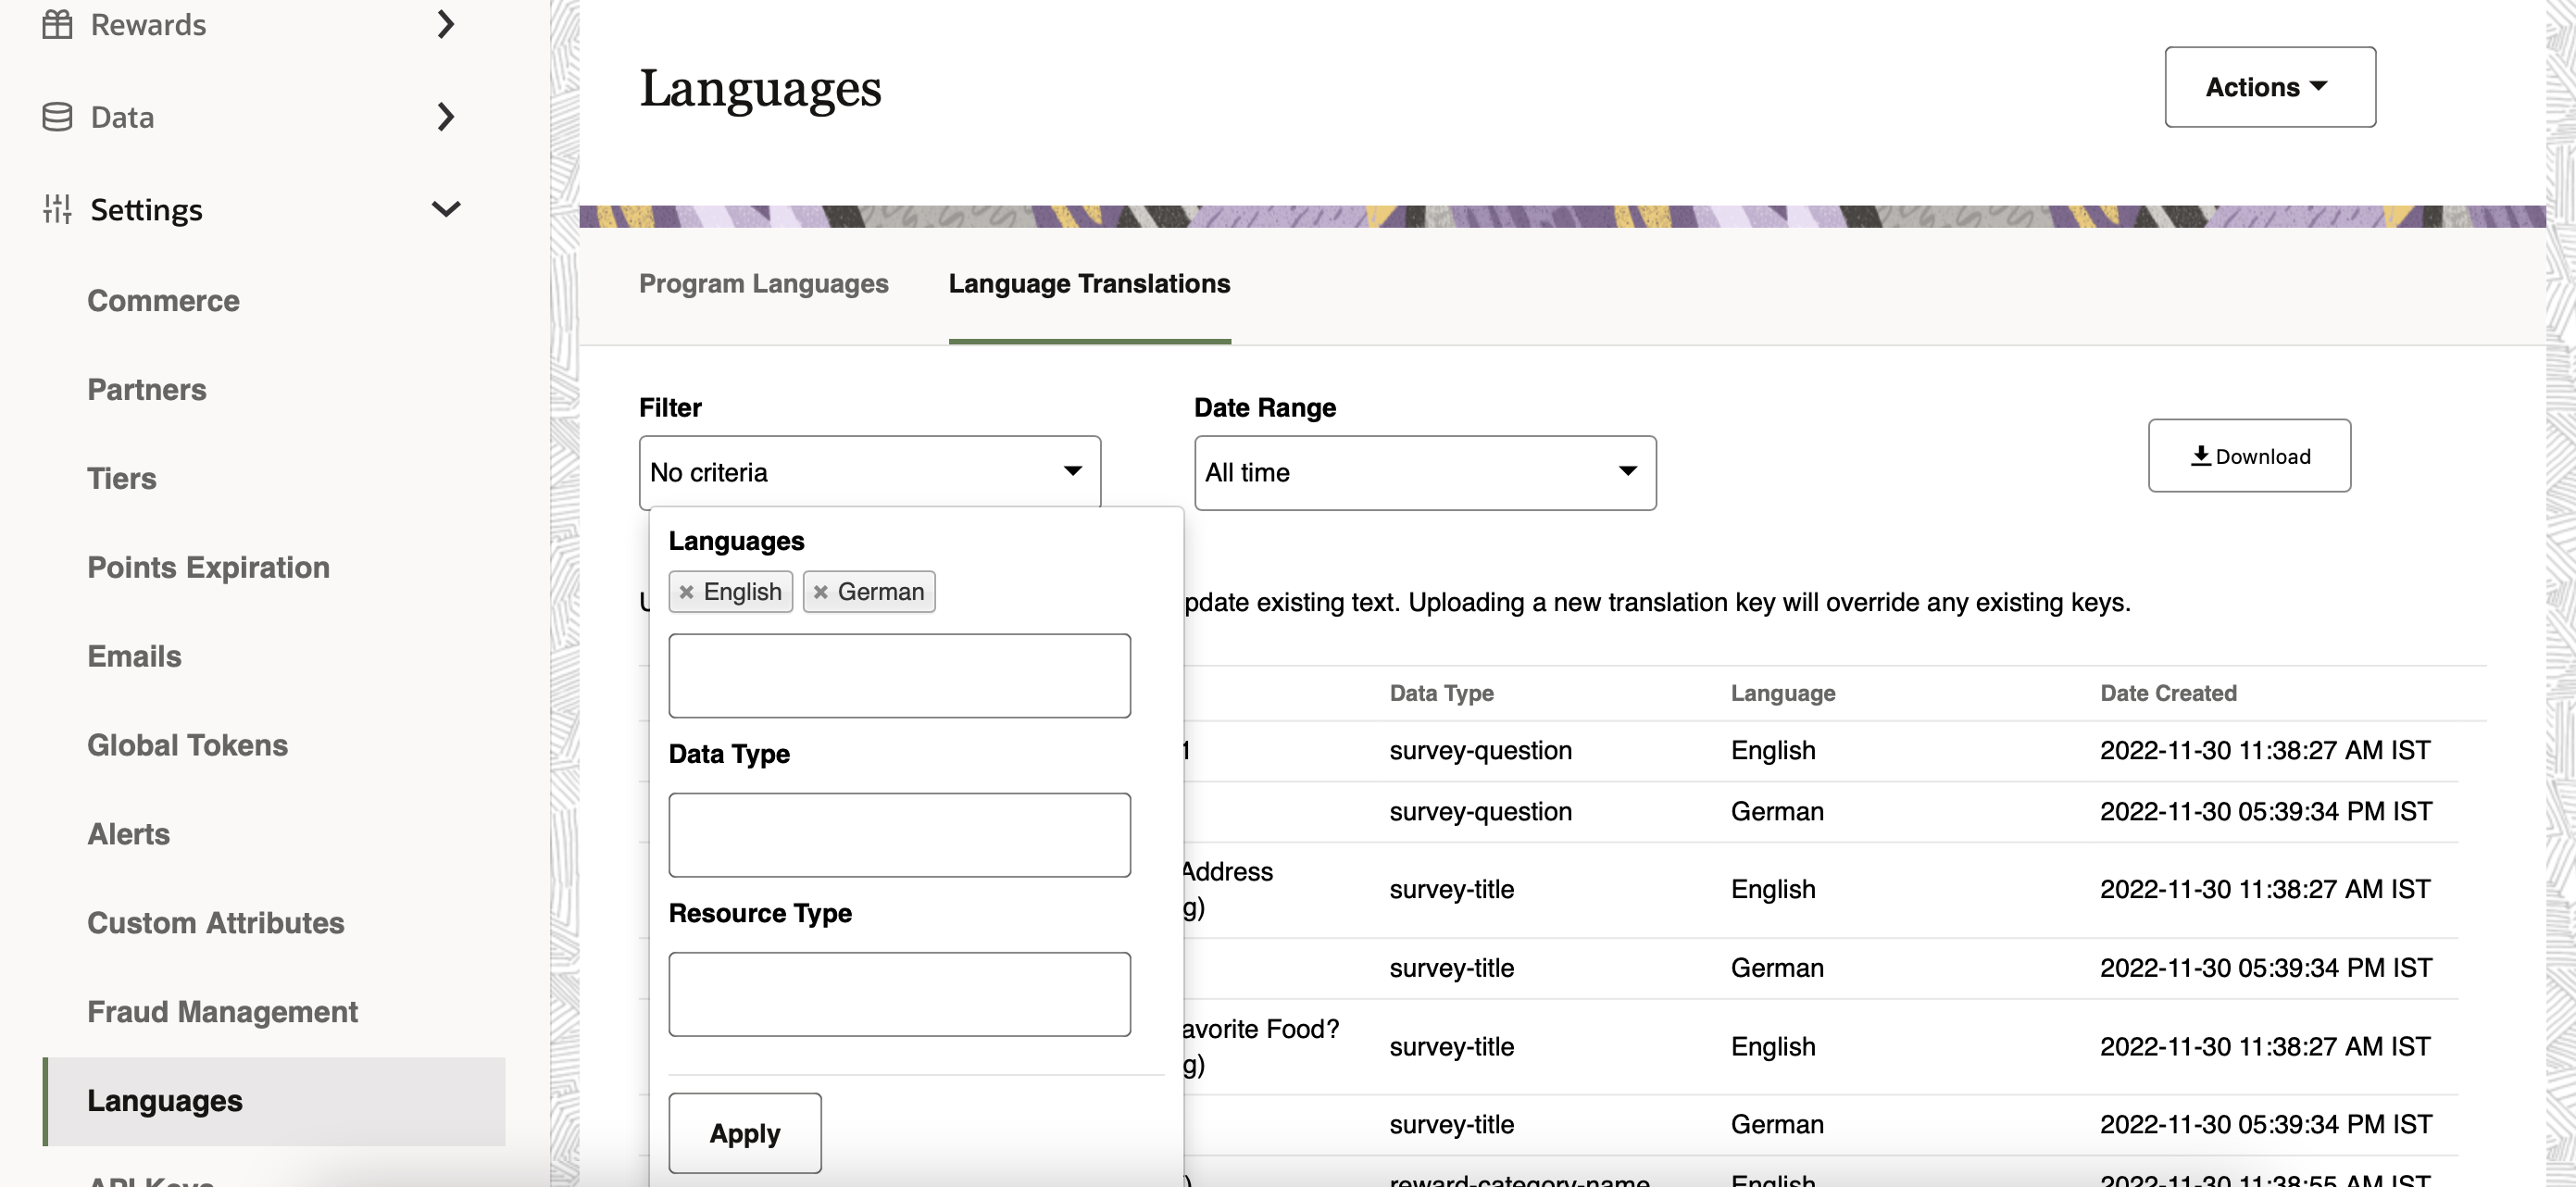 This image shows the Filter fields for Languages, Data Type, and Resource Type.